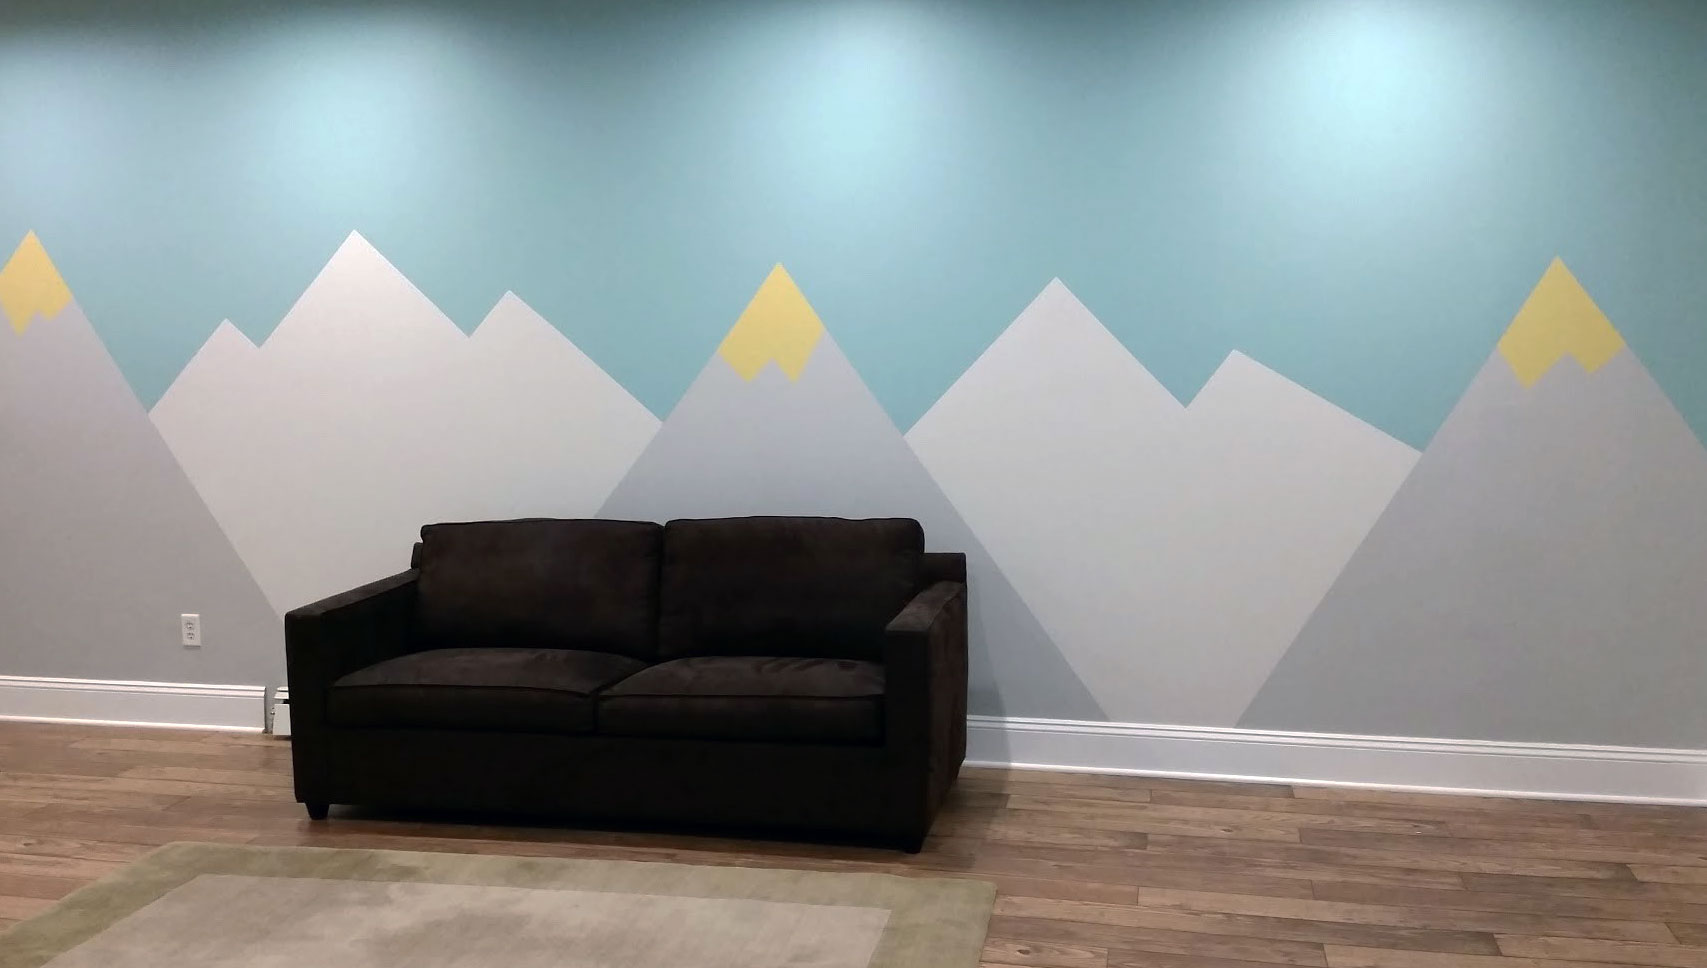 Sofa sitting against a custom painted wall of mountains